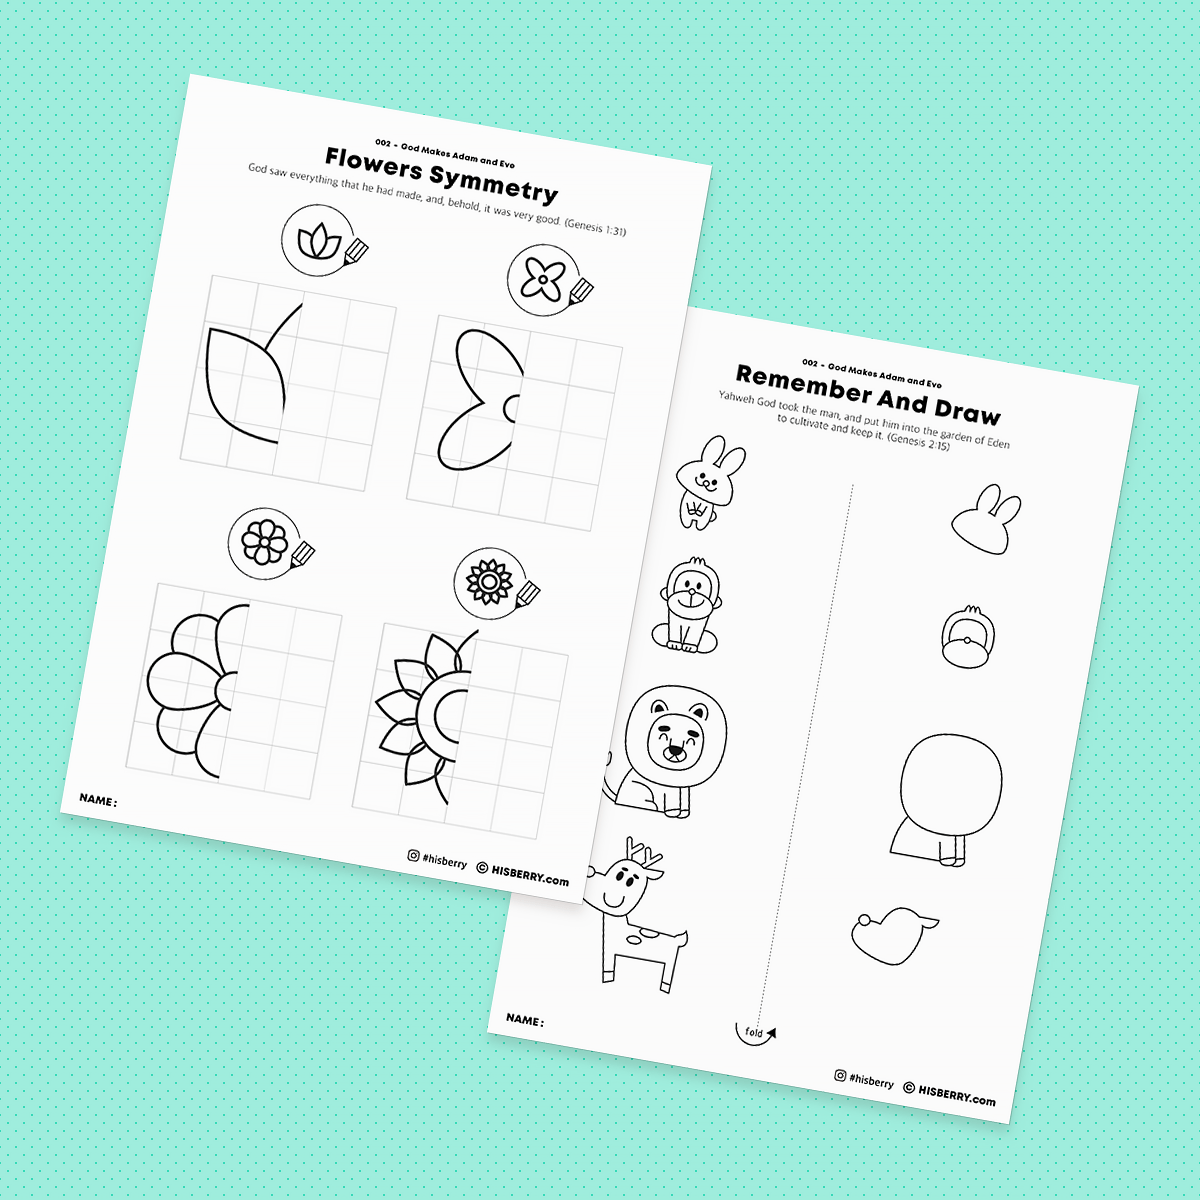 The Garden of Eden Adam and Eve Bible lesson Activity Printables for kids